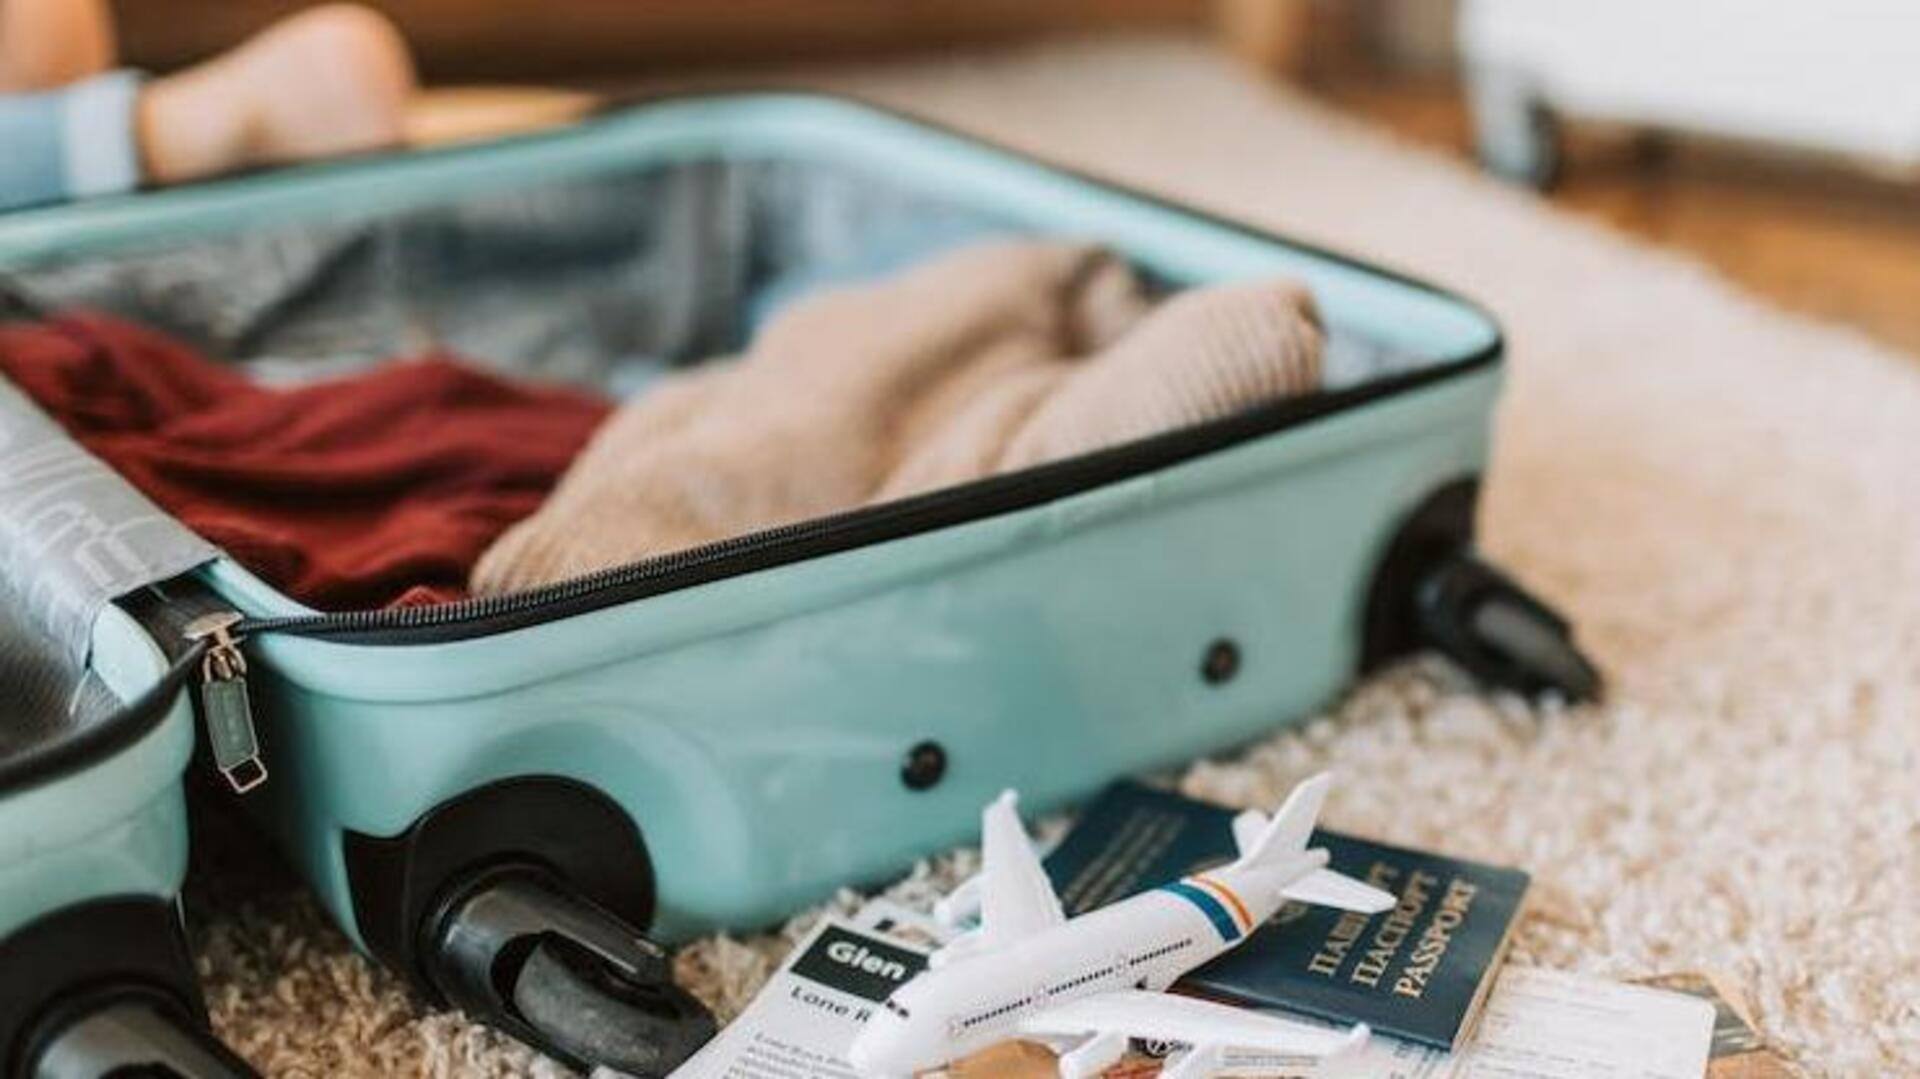 5 essential packing tips to travel with just a carry-on